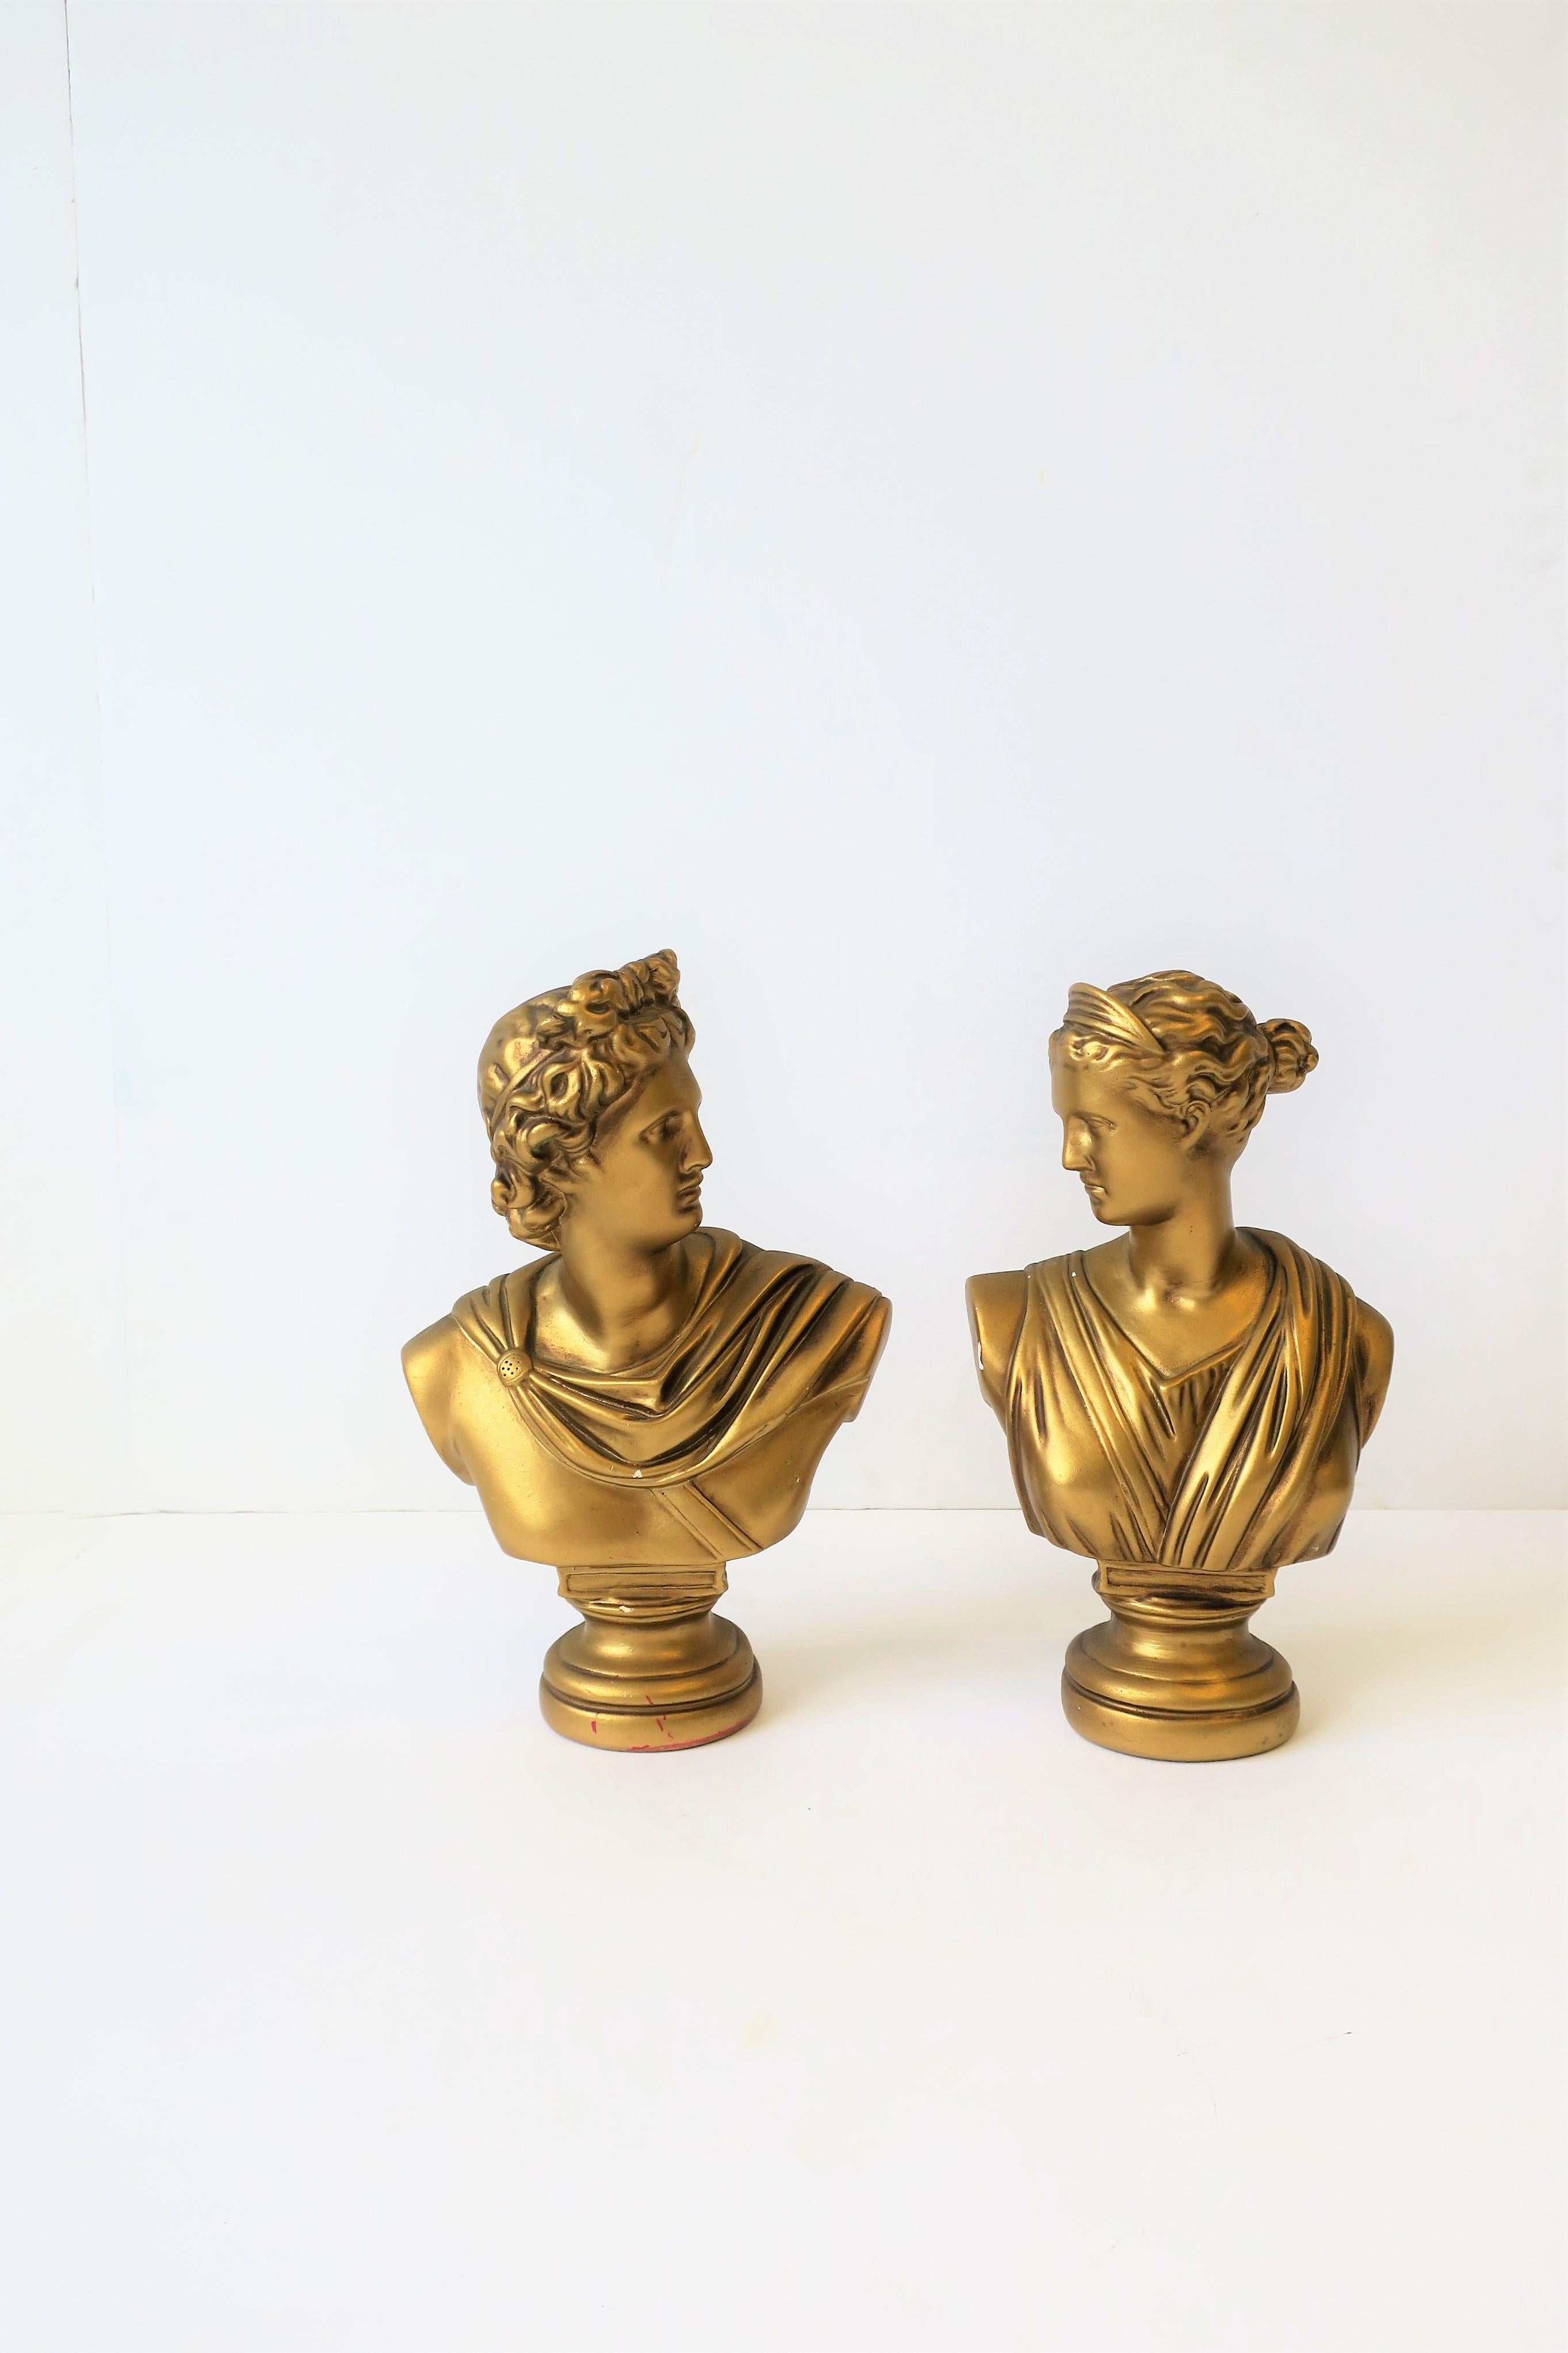 Polychromed Pair of Midcentury Italian Gold Plaster Classic Roman Bust Sculptures